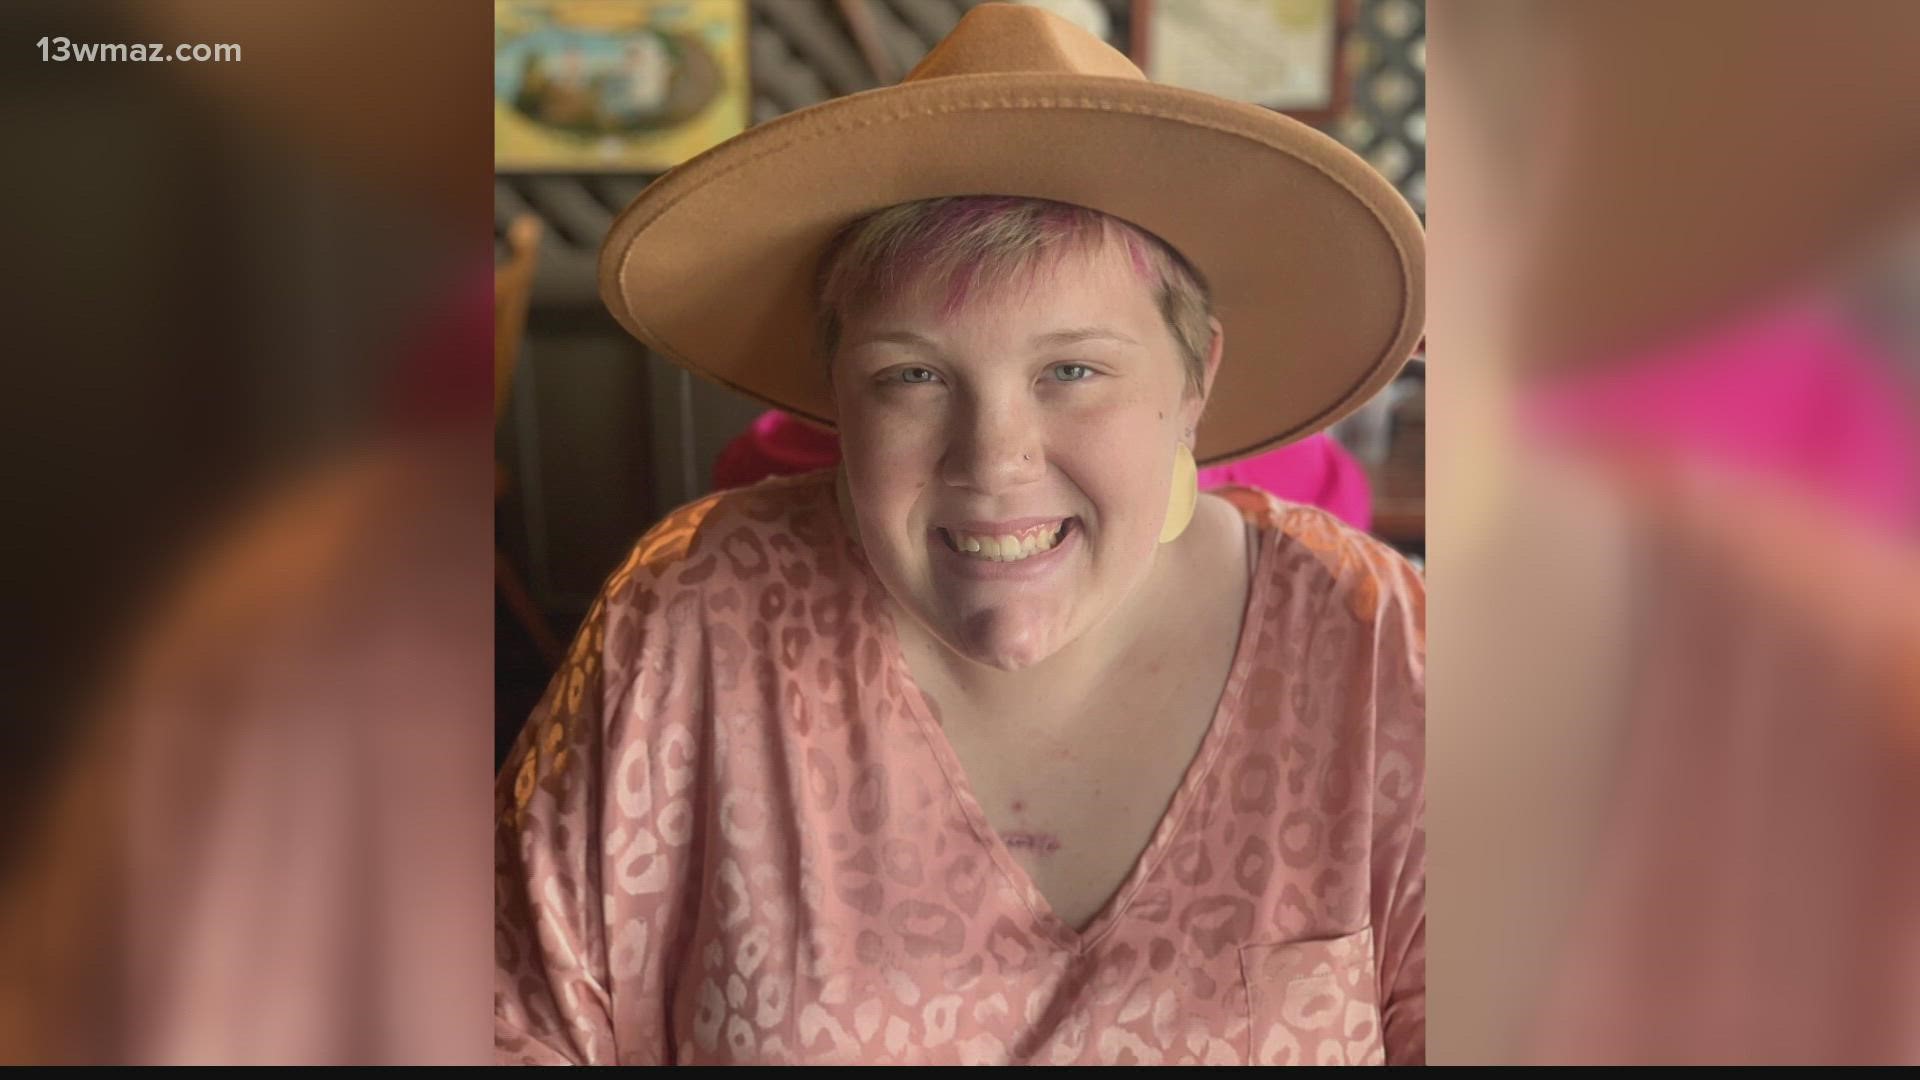 People in Jones County are mourning the death of 16-year-old Emma Moseley, who died after a long battle with cancer.